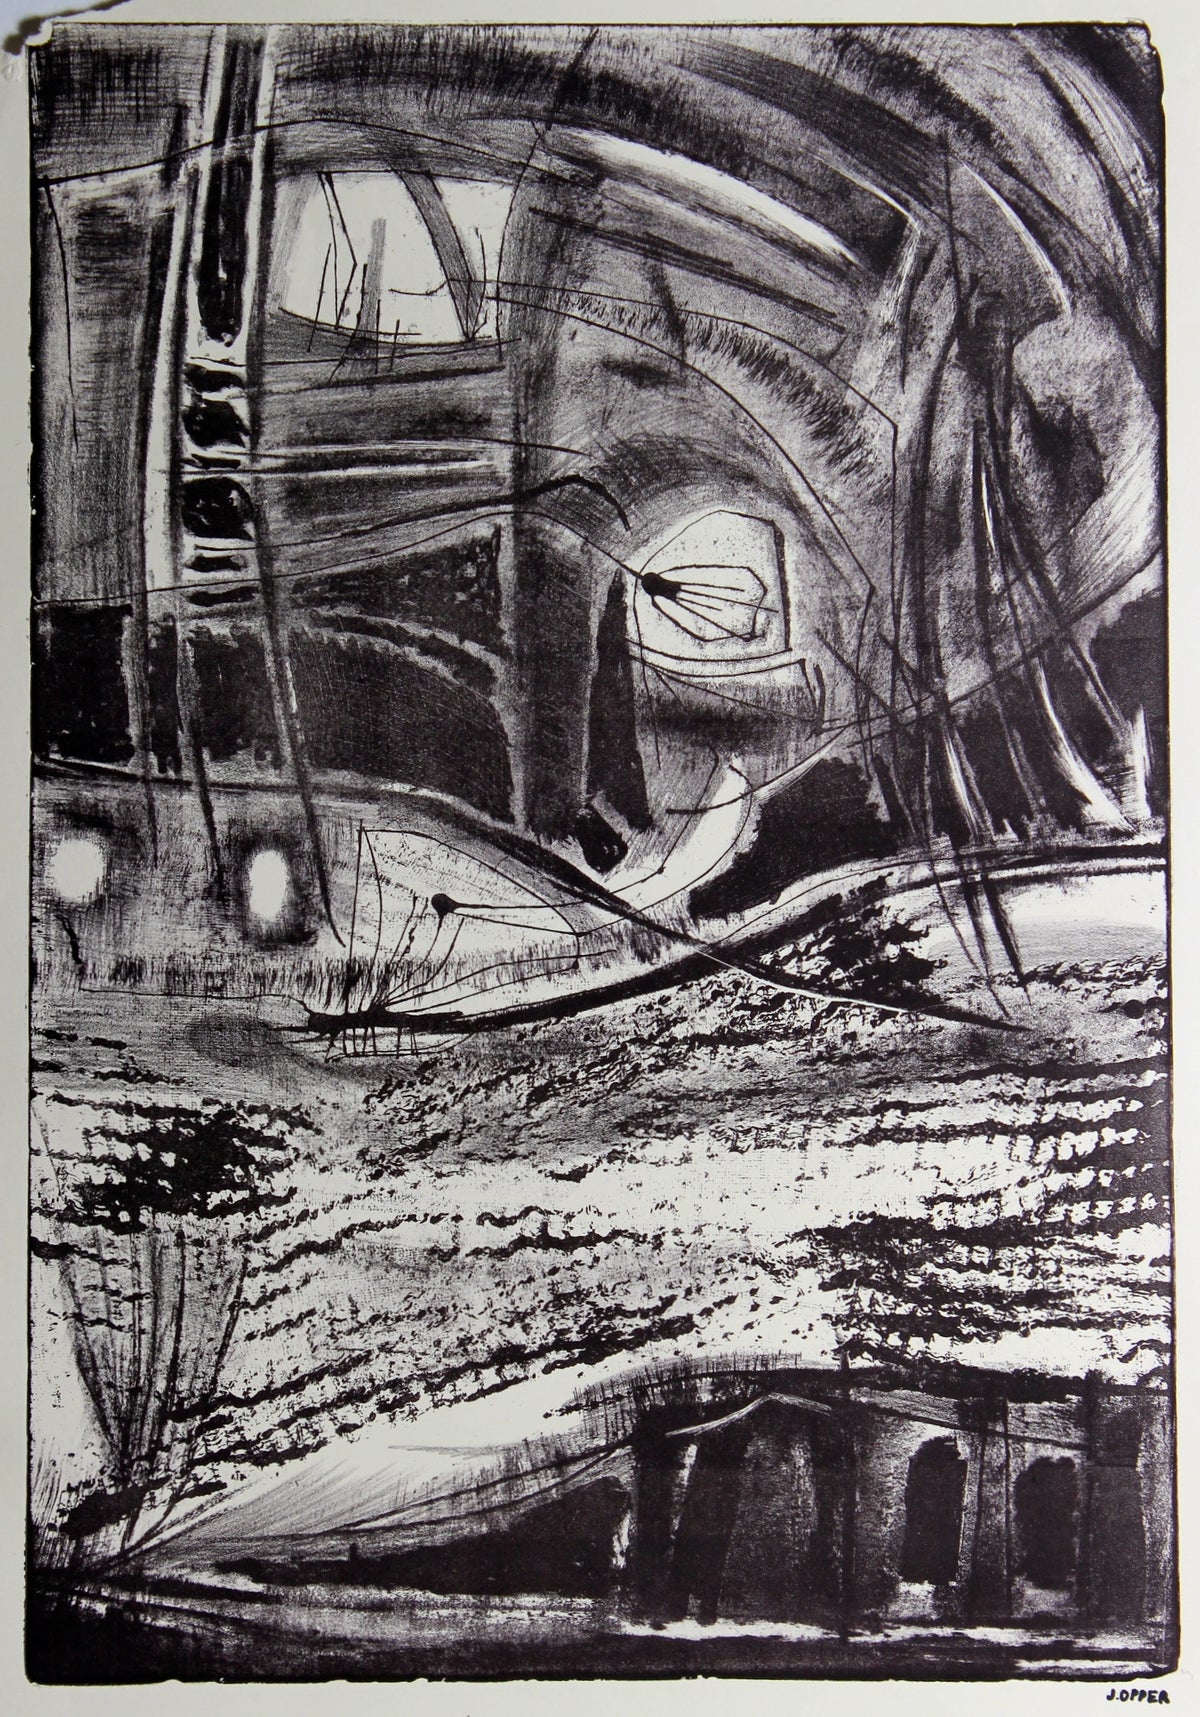 Monochrome Abstracted City Scene &lt;br&gt;1940-50s Lithograph &lt;br&gt;&lt;br&gt;#38910